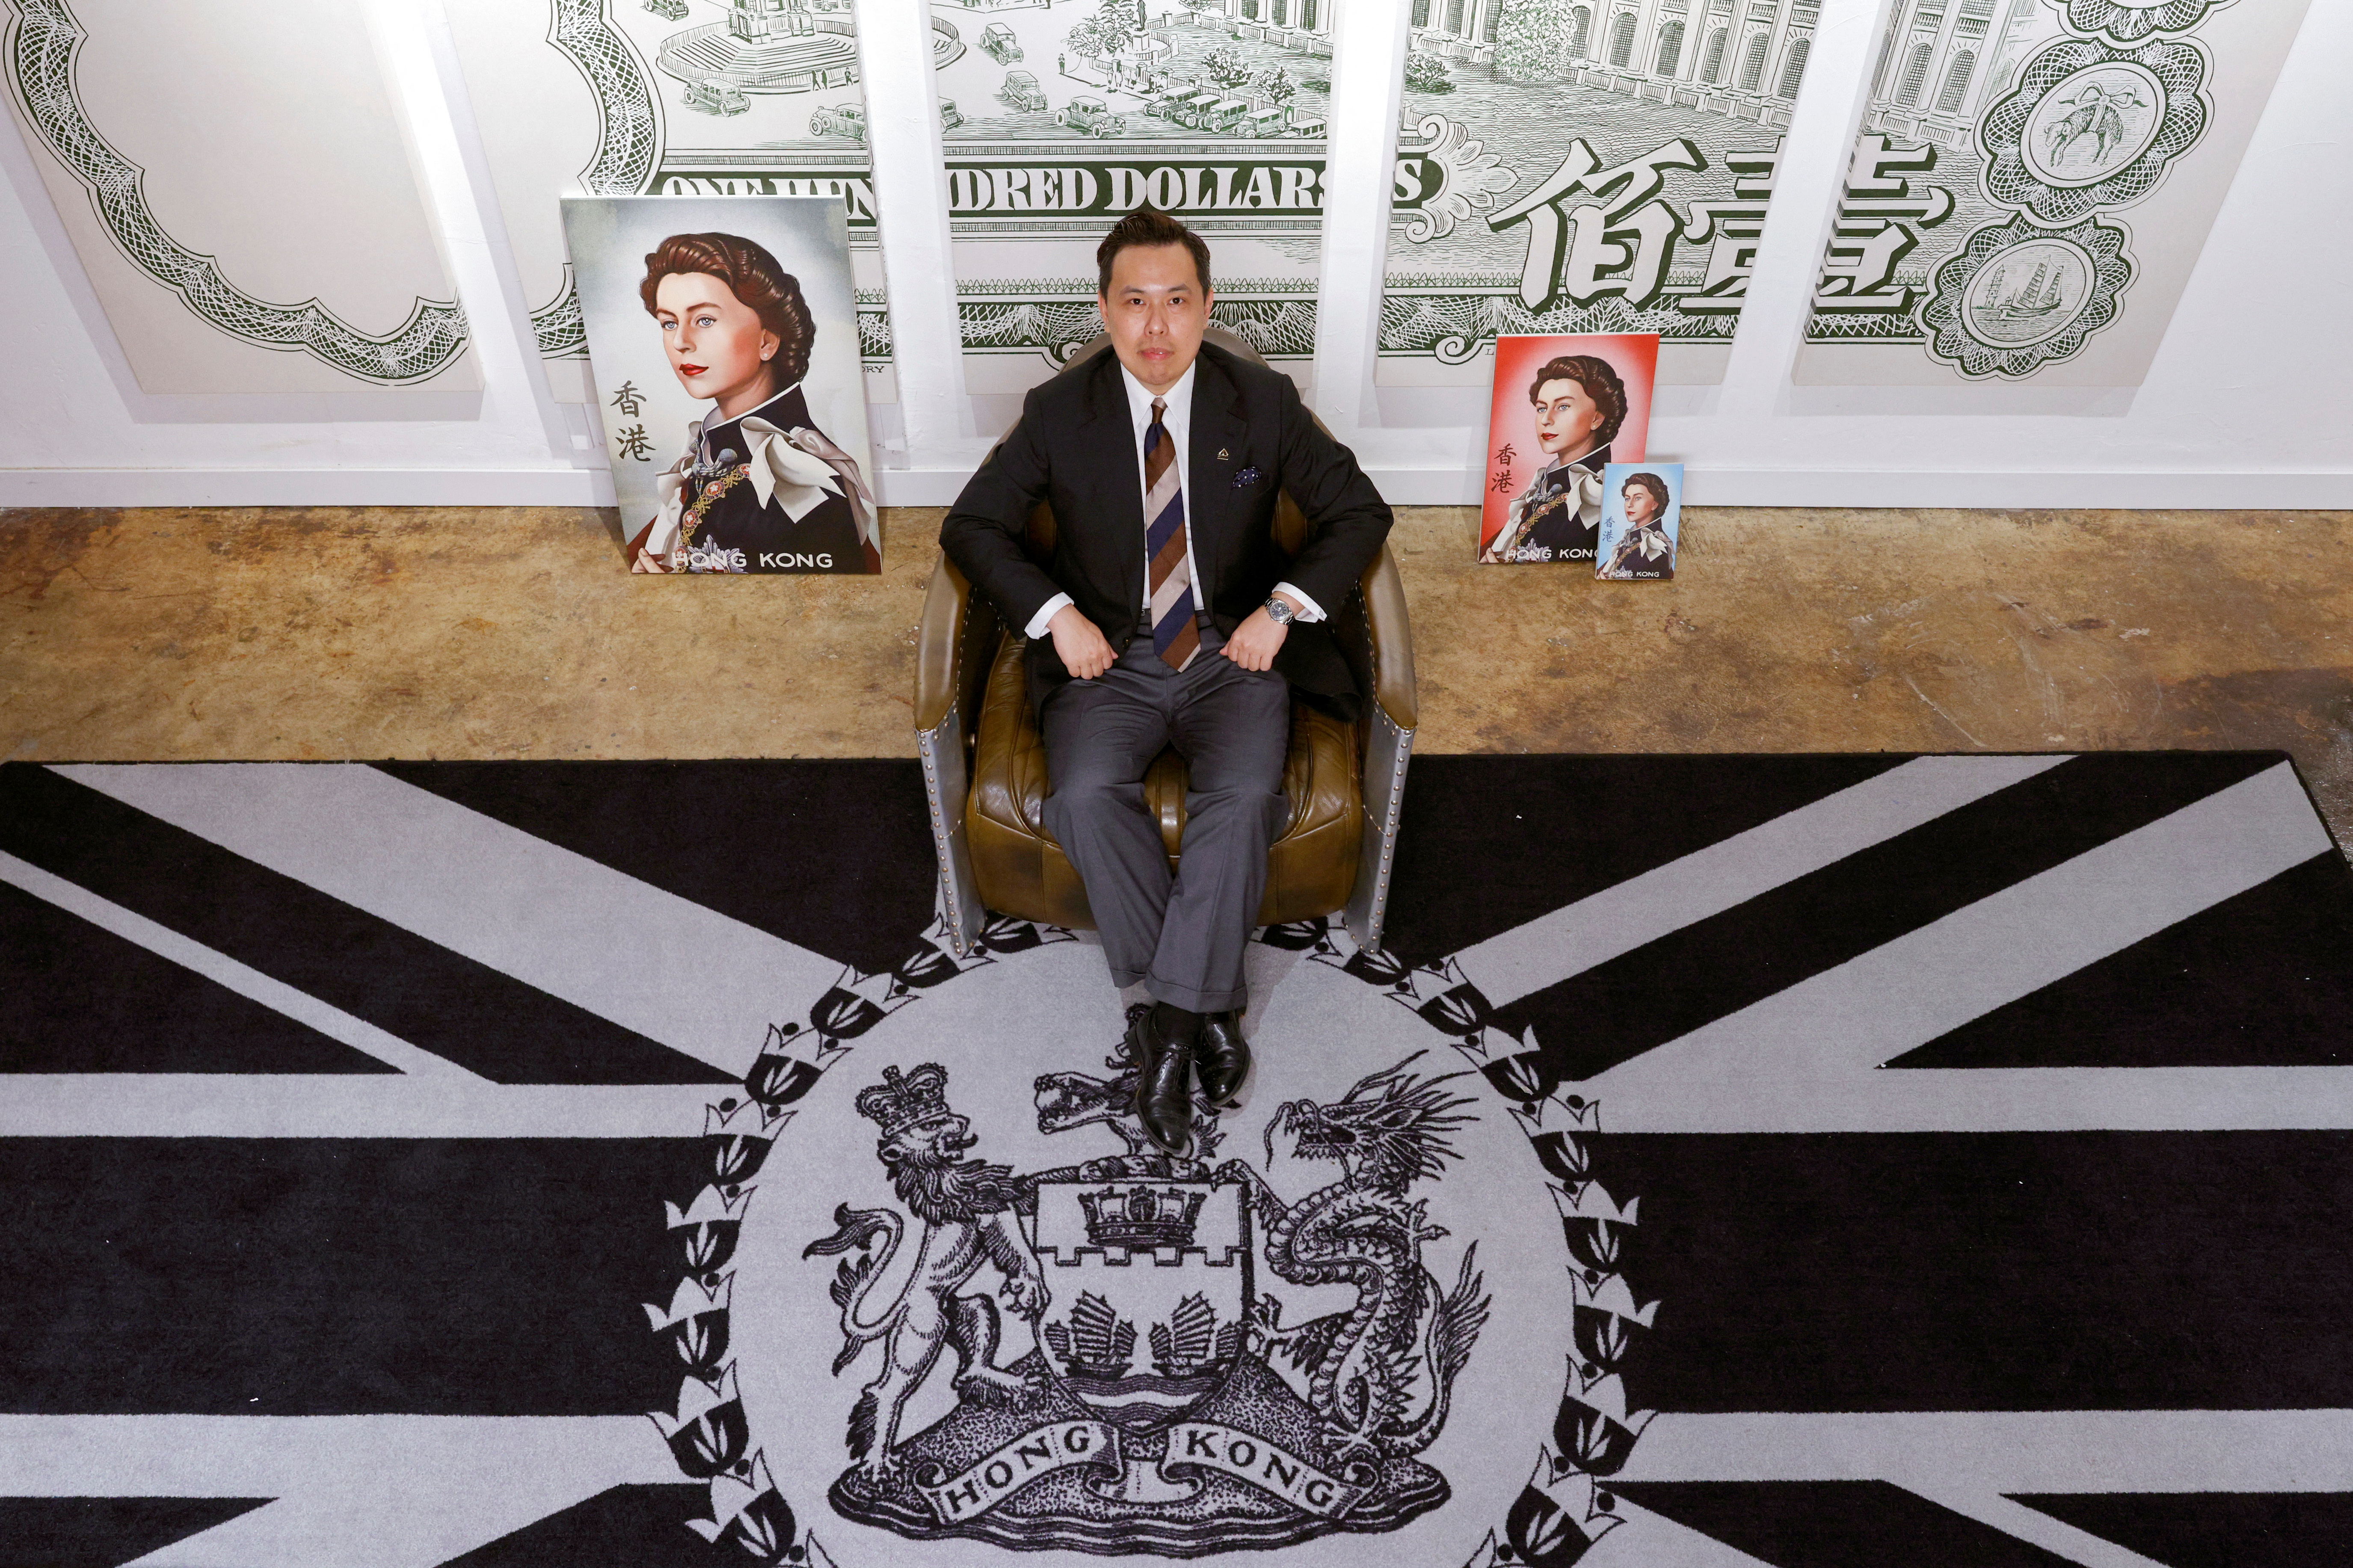 Bryan Ong, founder of the Museum Victoria City, poses for photo at the museum in Hong Kong